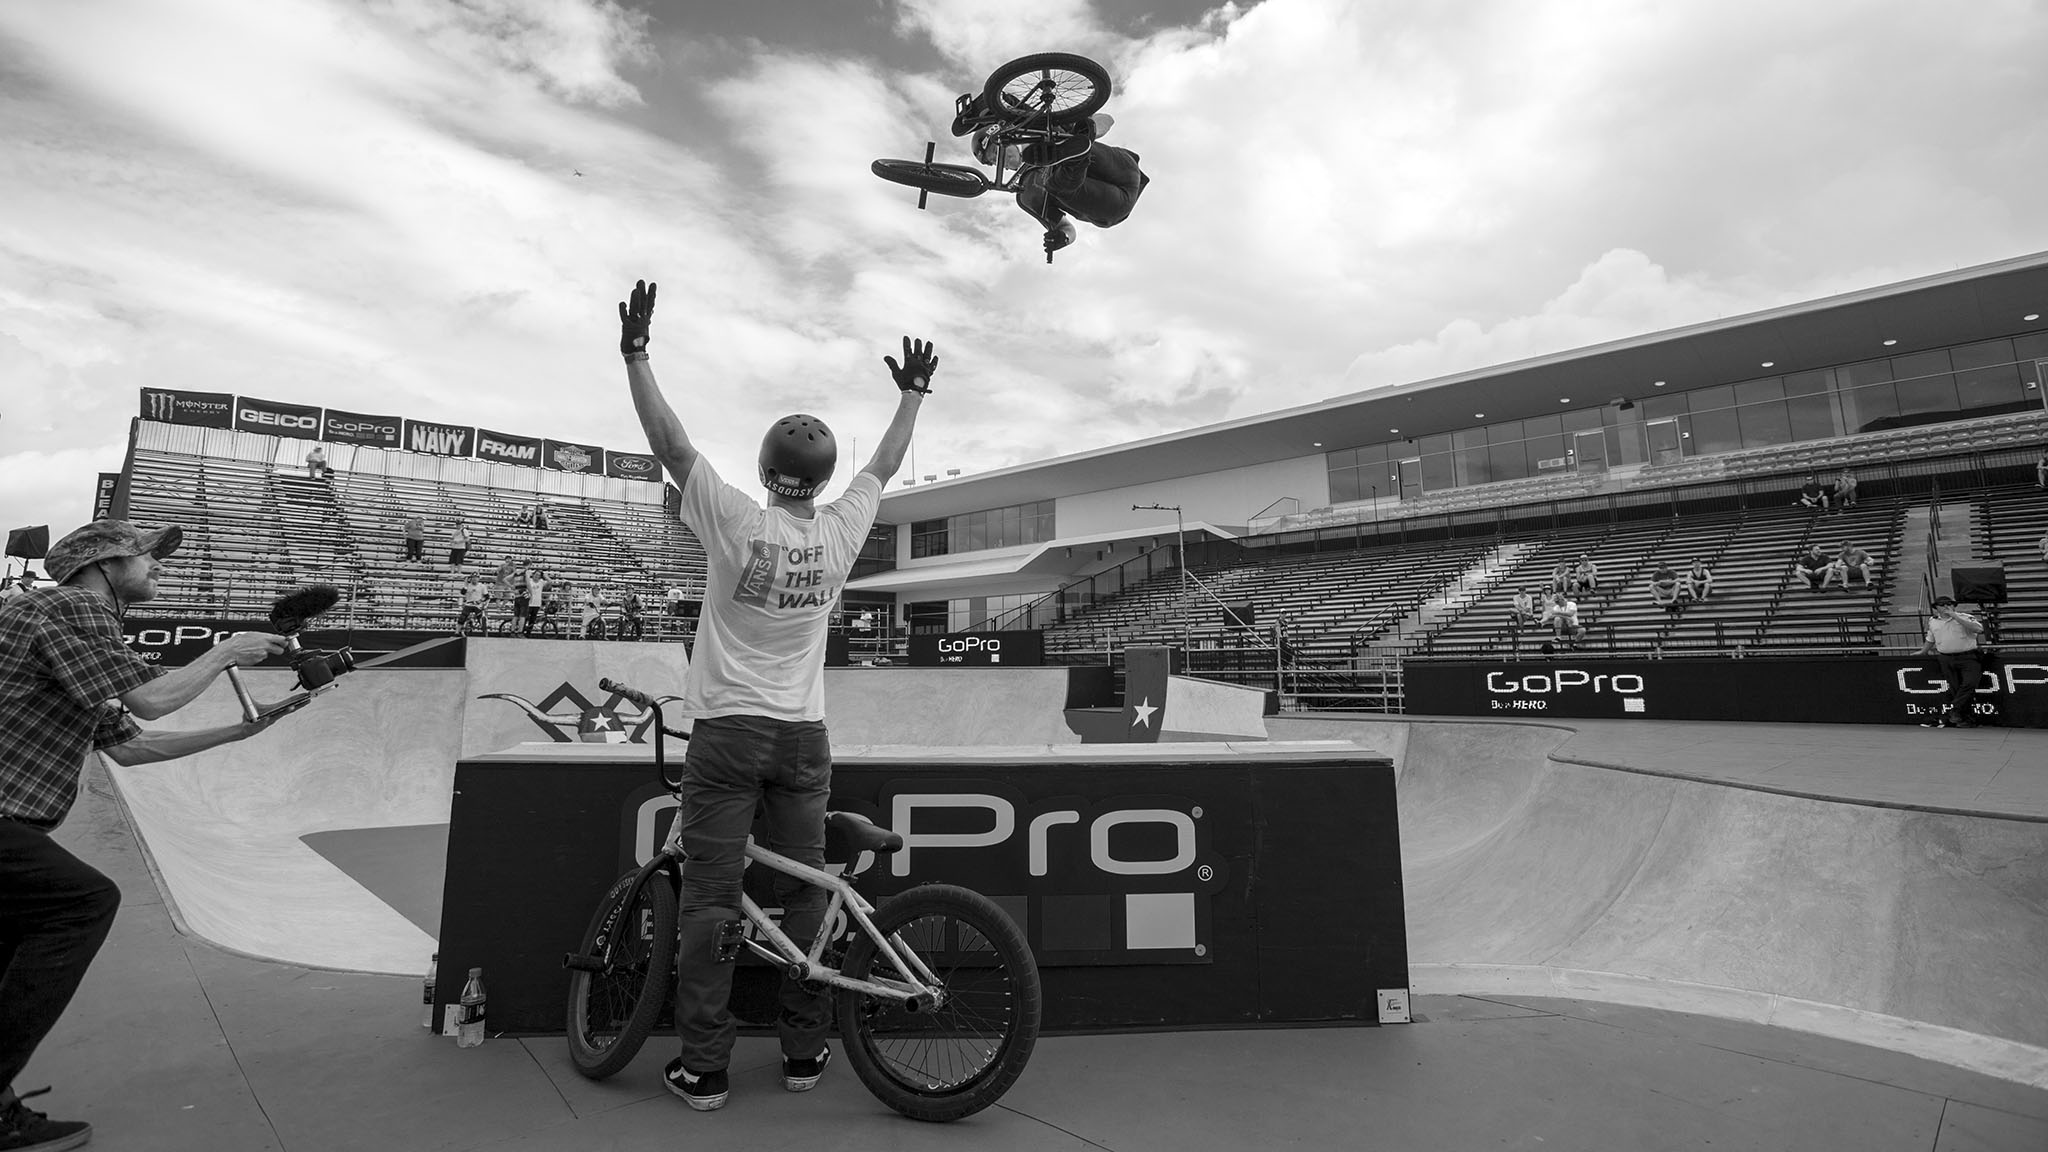 Haro/Nike pro Dennis Enarson has been on the verge of a BMX Park win at X Games for several years, and again in X Games Austin, the gold medal eluded him. But the fans love Enarson, his style, his ability to air, and the fact that he rides every contest with a huge grin across his face. At X Games Austin, Enarson finished in an uncharacteristic ninth place.